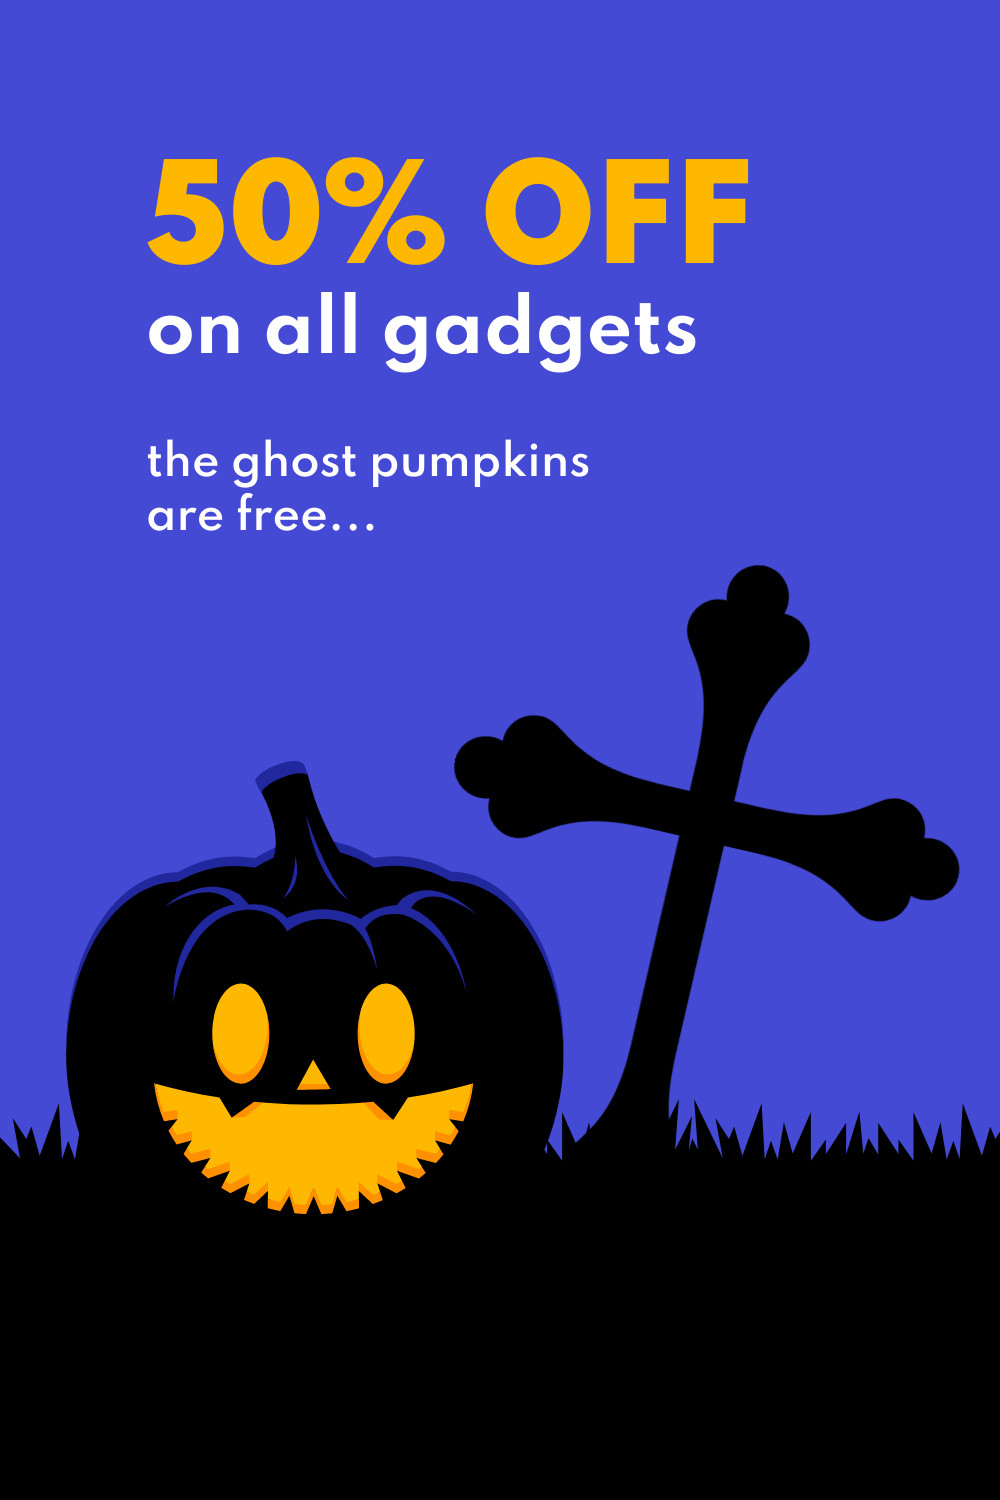 Gadget Sale with Free Ghost Pumpkins Inline Rectangle 300x250